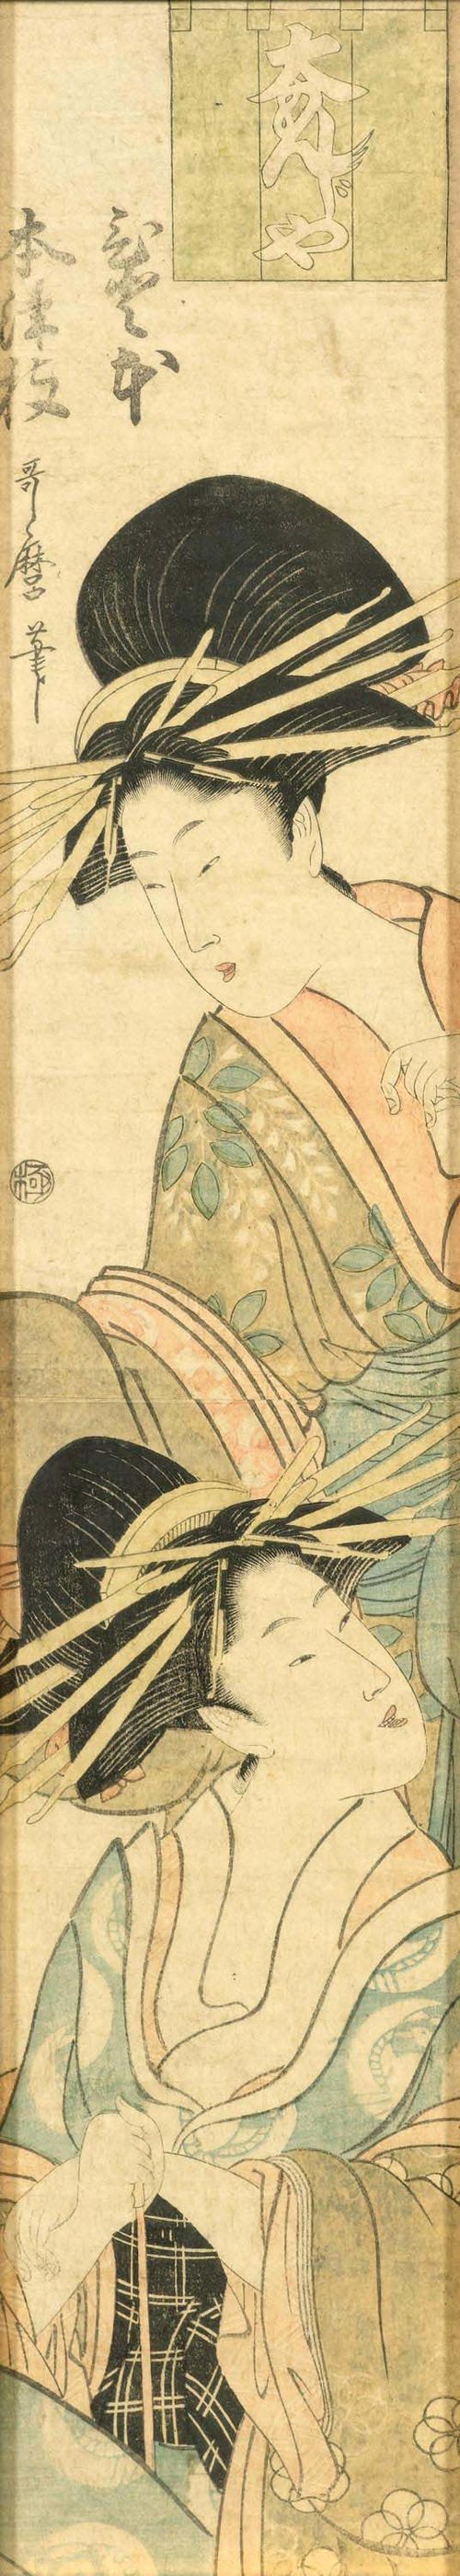 A WOODBLOCK PRINT BY KITAGAWA UTAMARO (1753-1806). Ca. 1795, 58x11 cm. Two sheets joined. Two courtisanes of the Daimonjiya. Kiwame. Faded. Framed under glass.